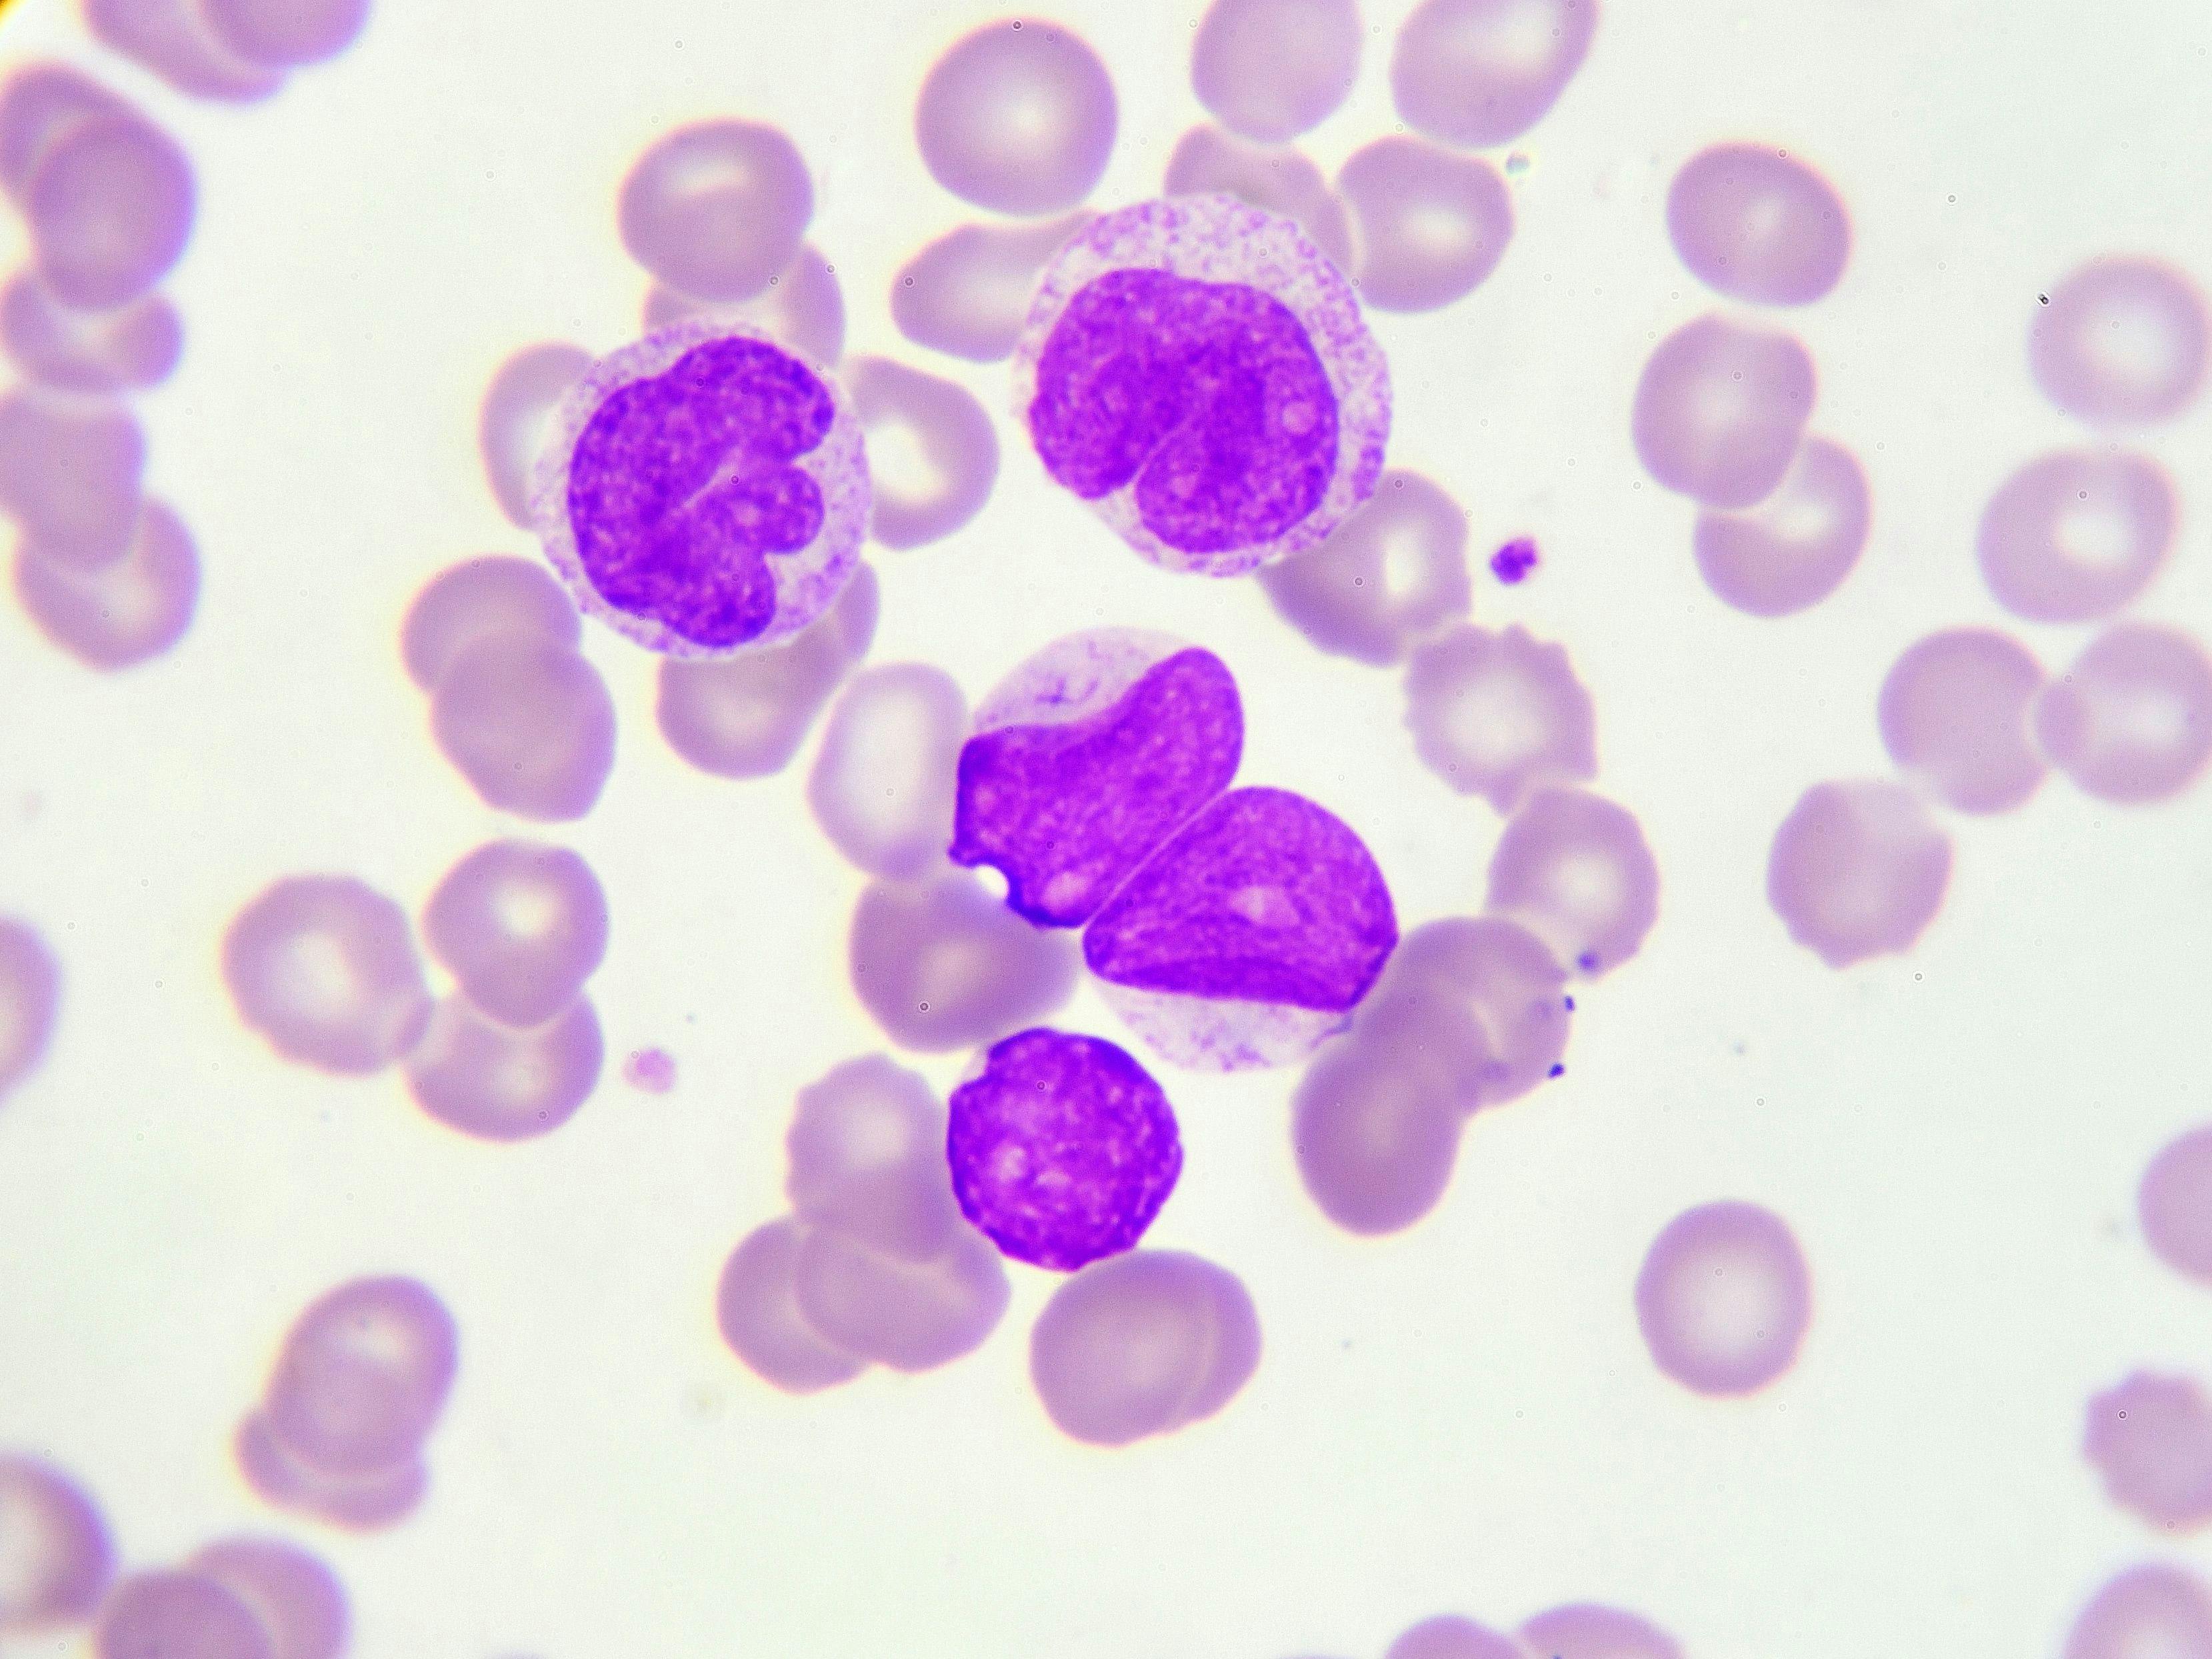 New Single-Cell Sequencing Method Effective in Distinguishing Between Healthy and Cancerous Cells in AML